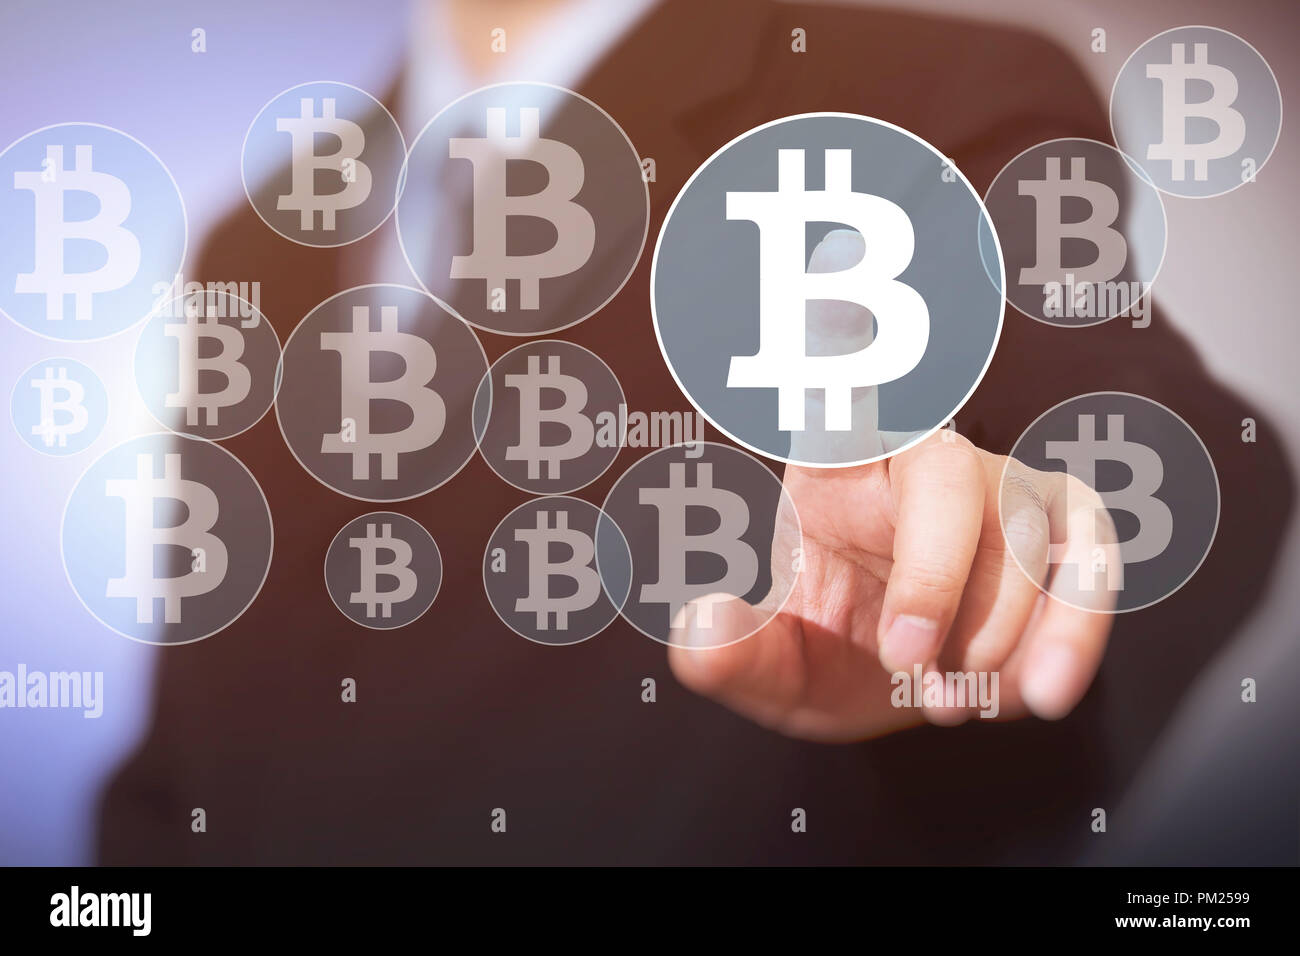 Bitcoin button on virtual interface displaying, businessman touching the currency symbol Stock Photo